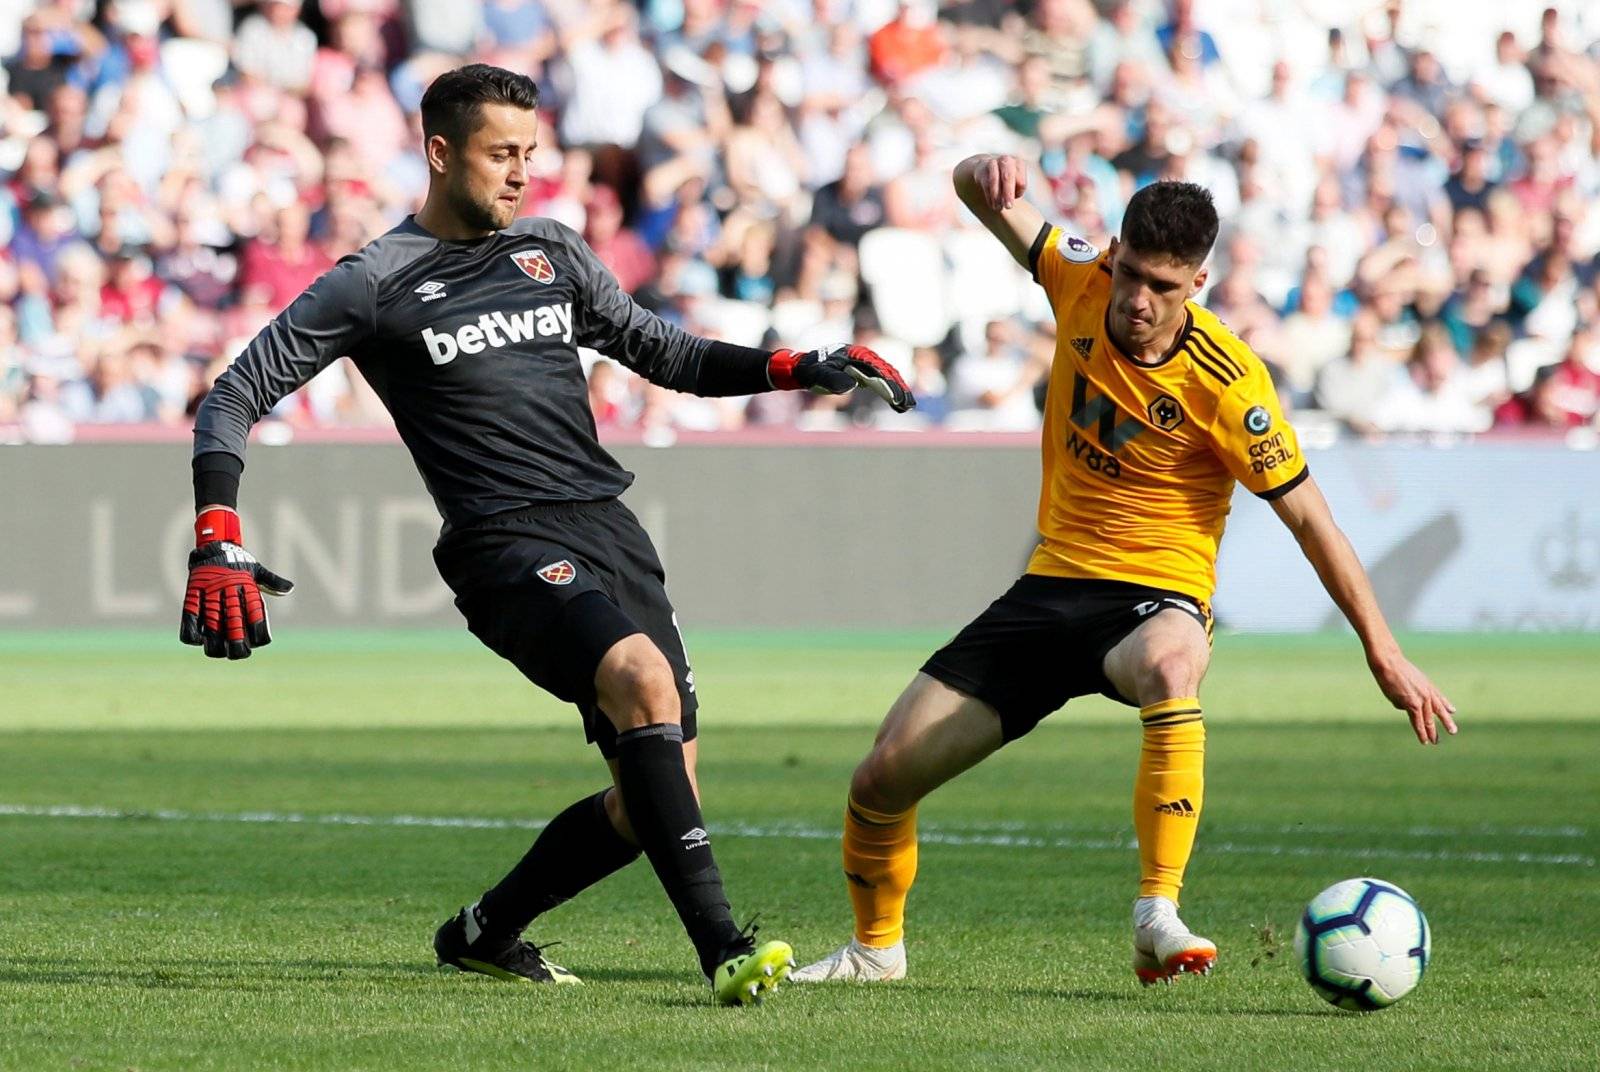 Forget Diop and Anderson: Lukasz Fabianski is proving to be West Ham's best summer signing - Opinion